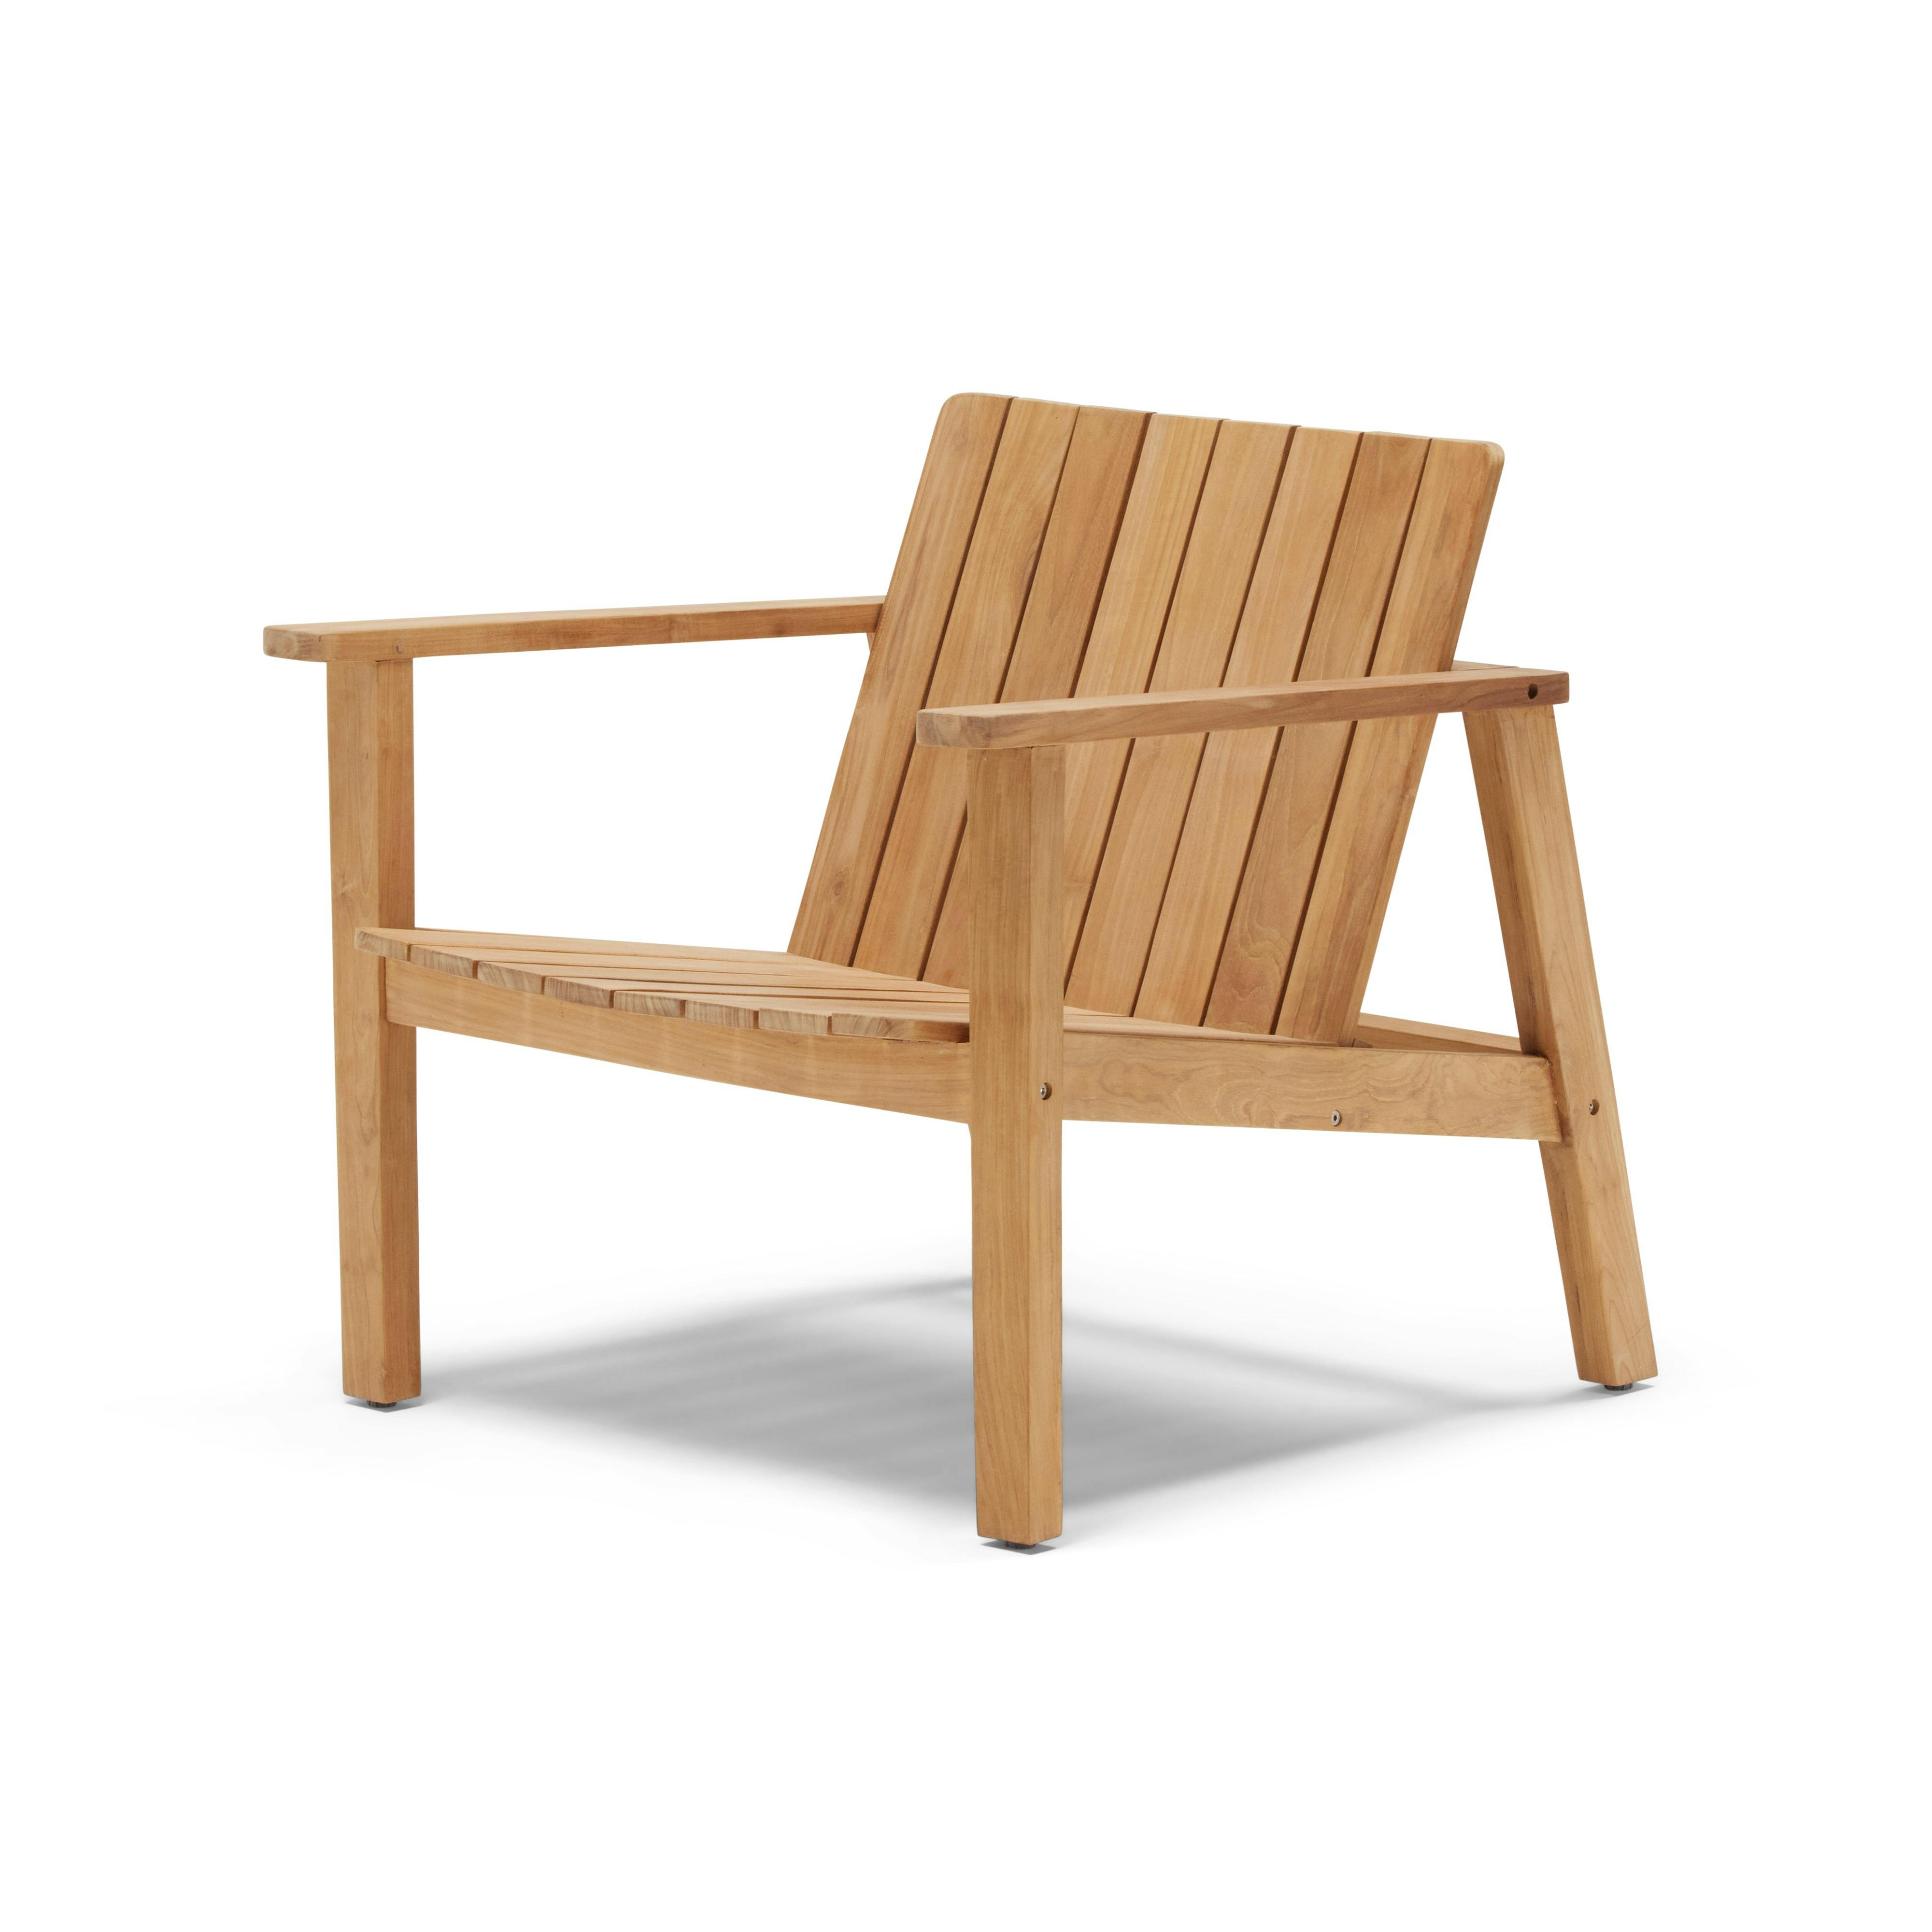 The Outdoor Low Chair